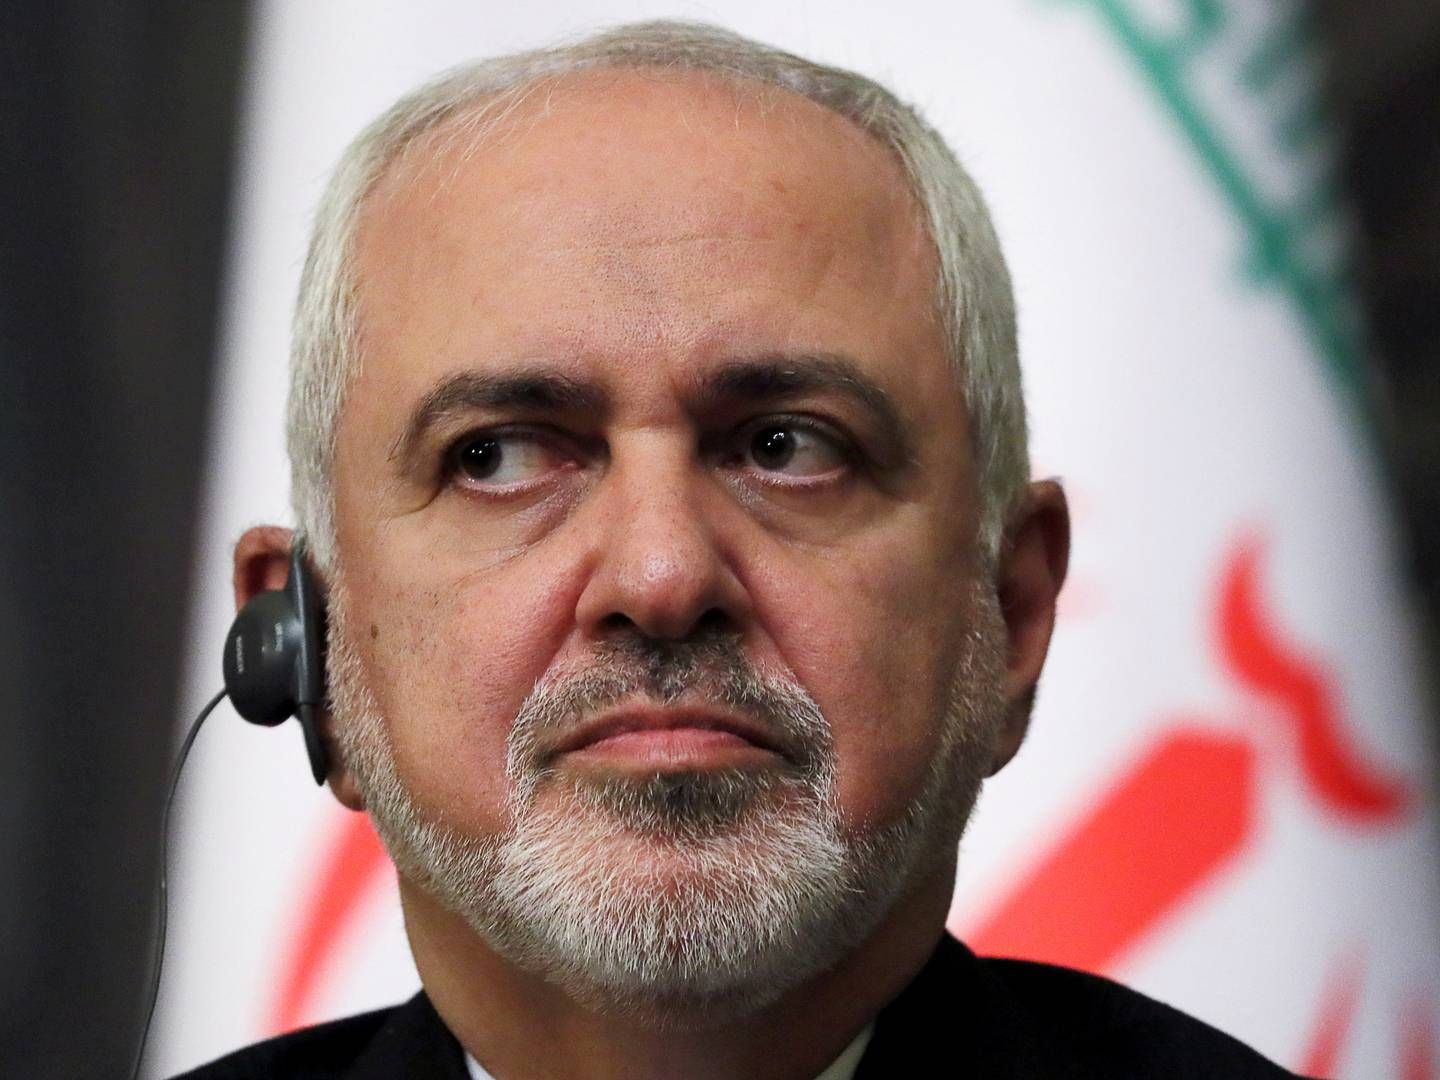 Mohammad Javad Zarif, Iran's foreign minister, says he does not want to close the Strait of Hormuz but that Iran is capable of doing so. | Photo: EVGENIA NOVOZHENINA/REUTERS / X90209